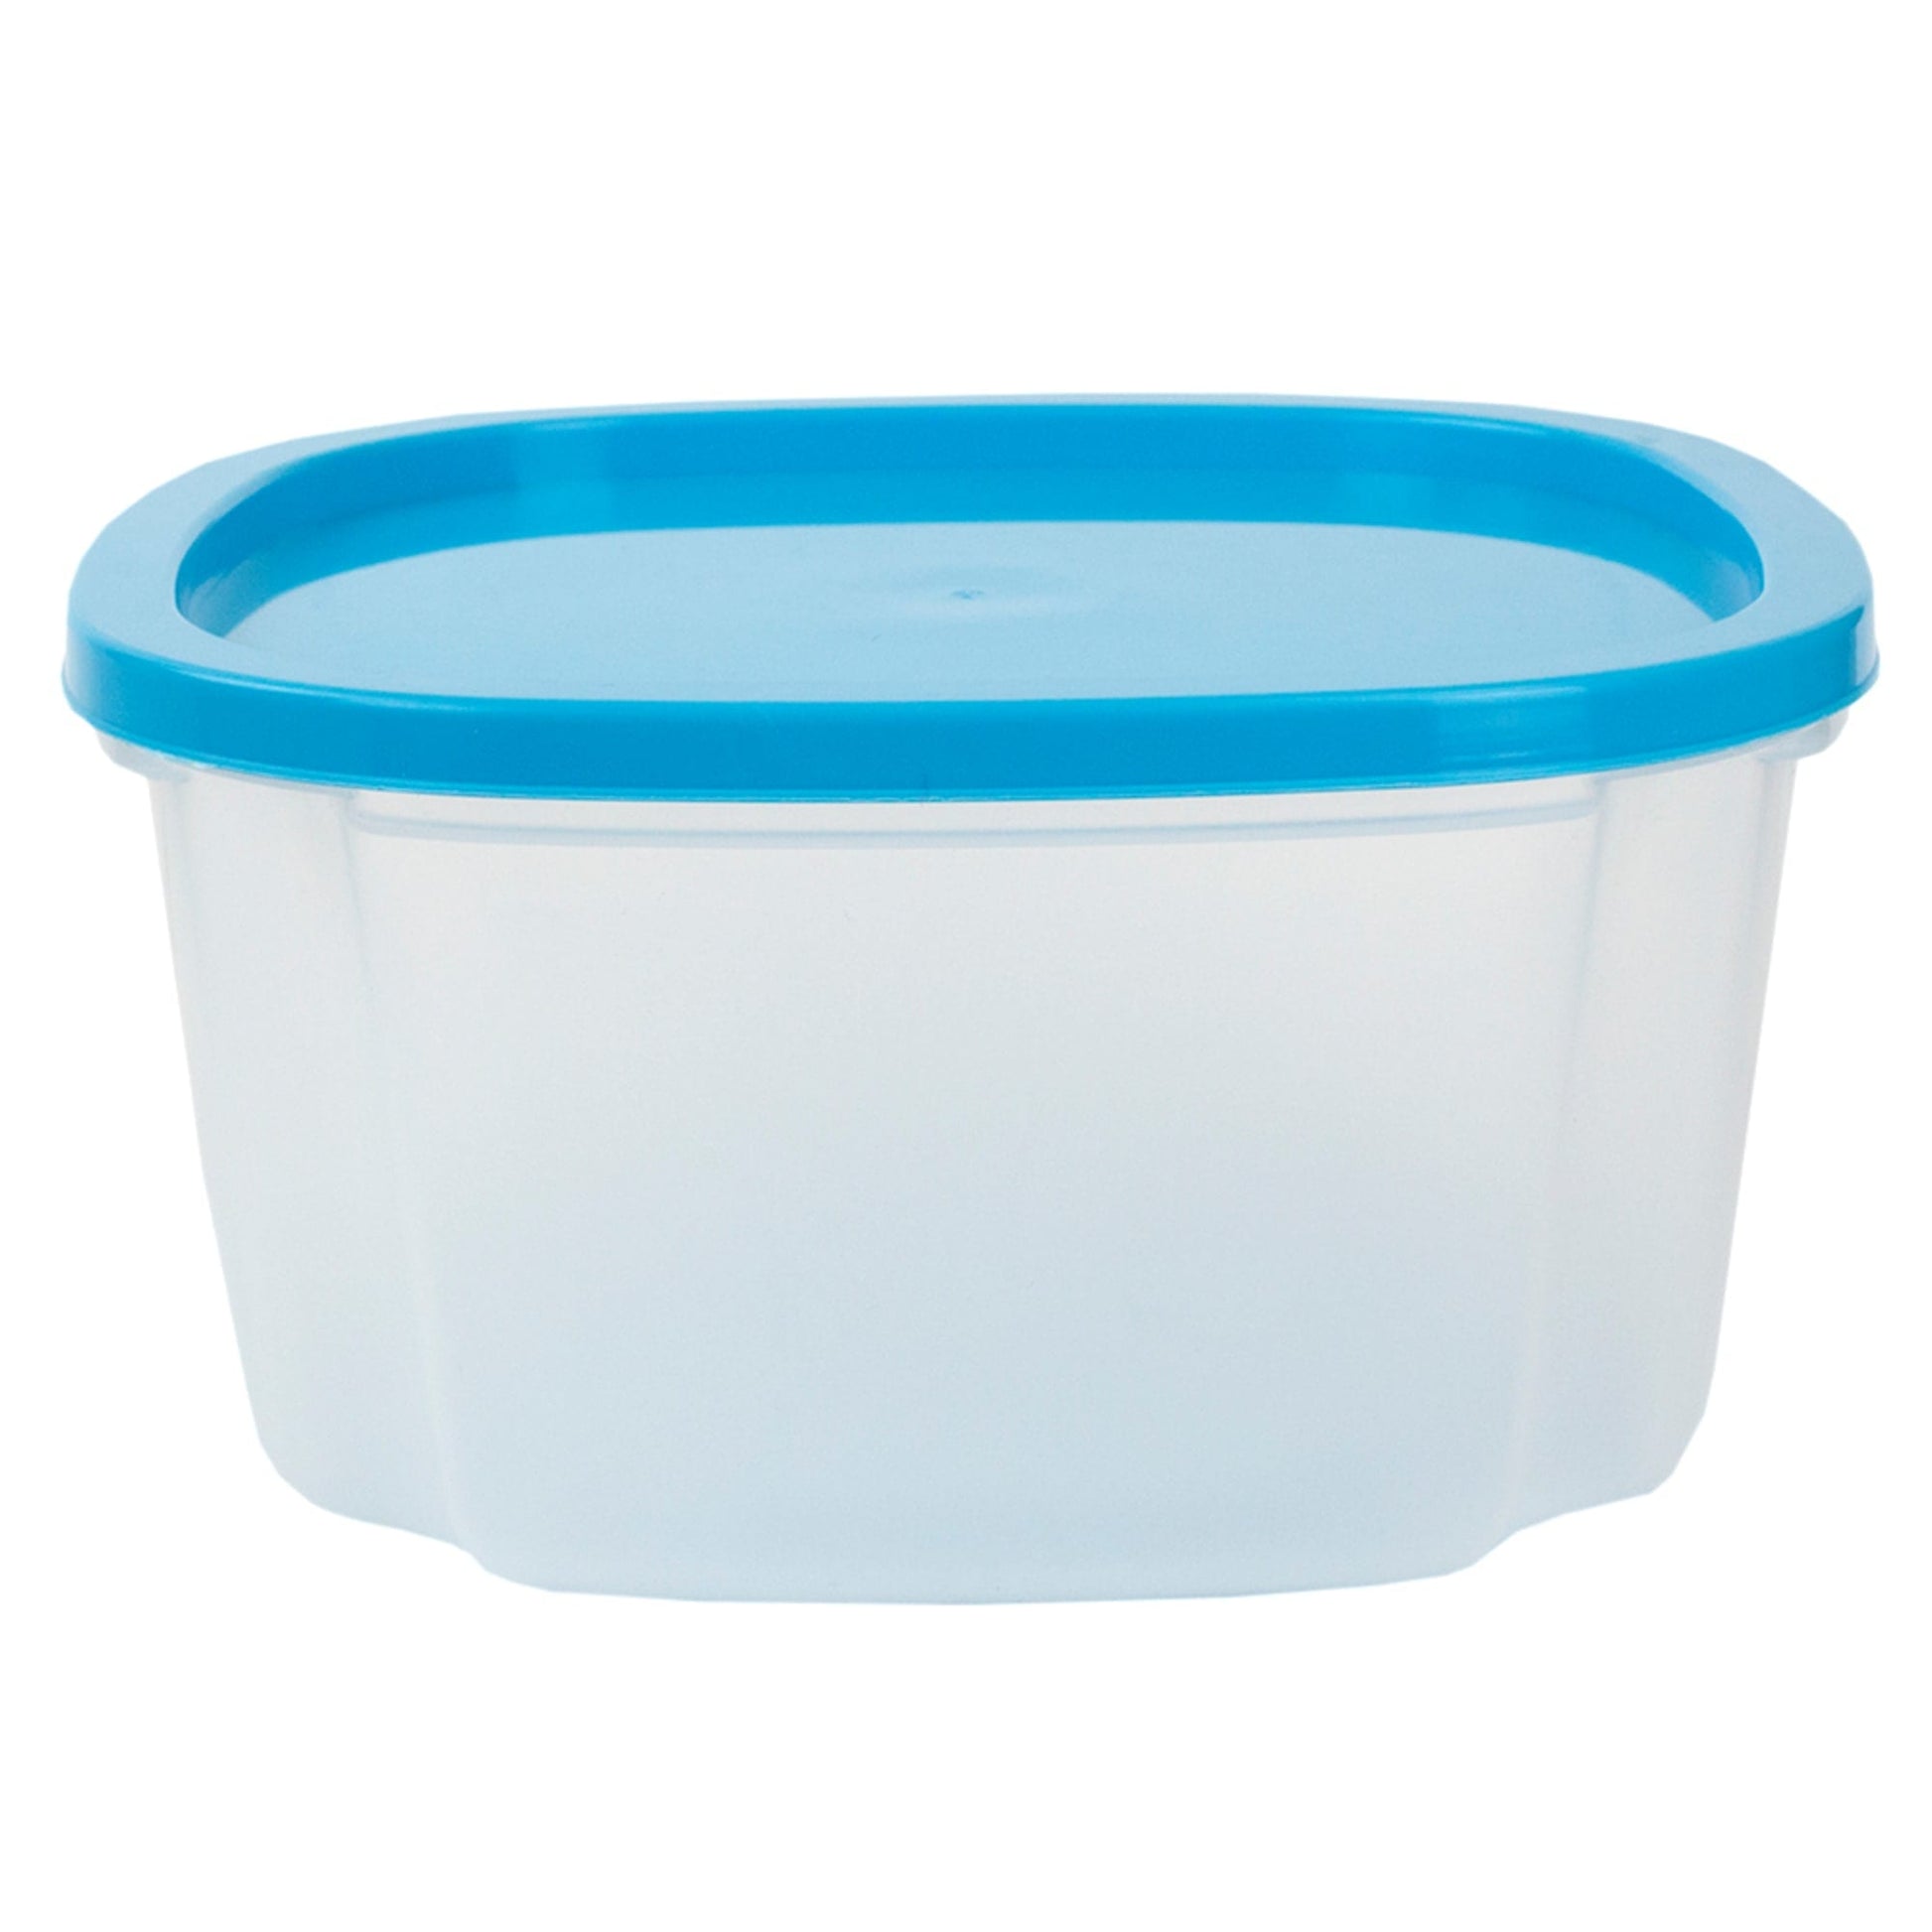 Square Food Storage Containers and Lids